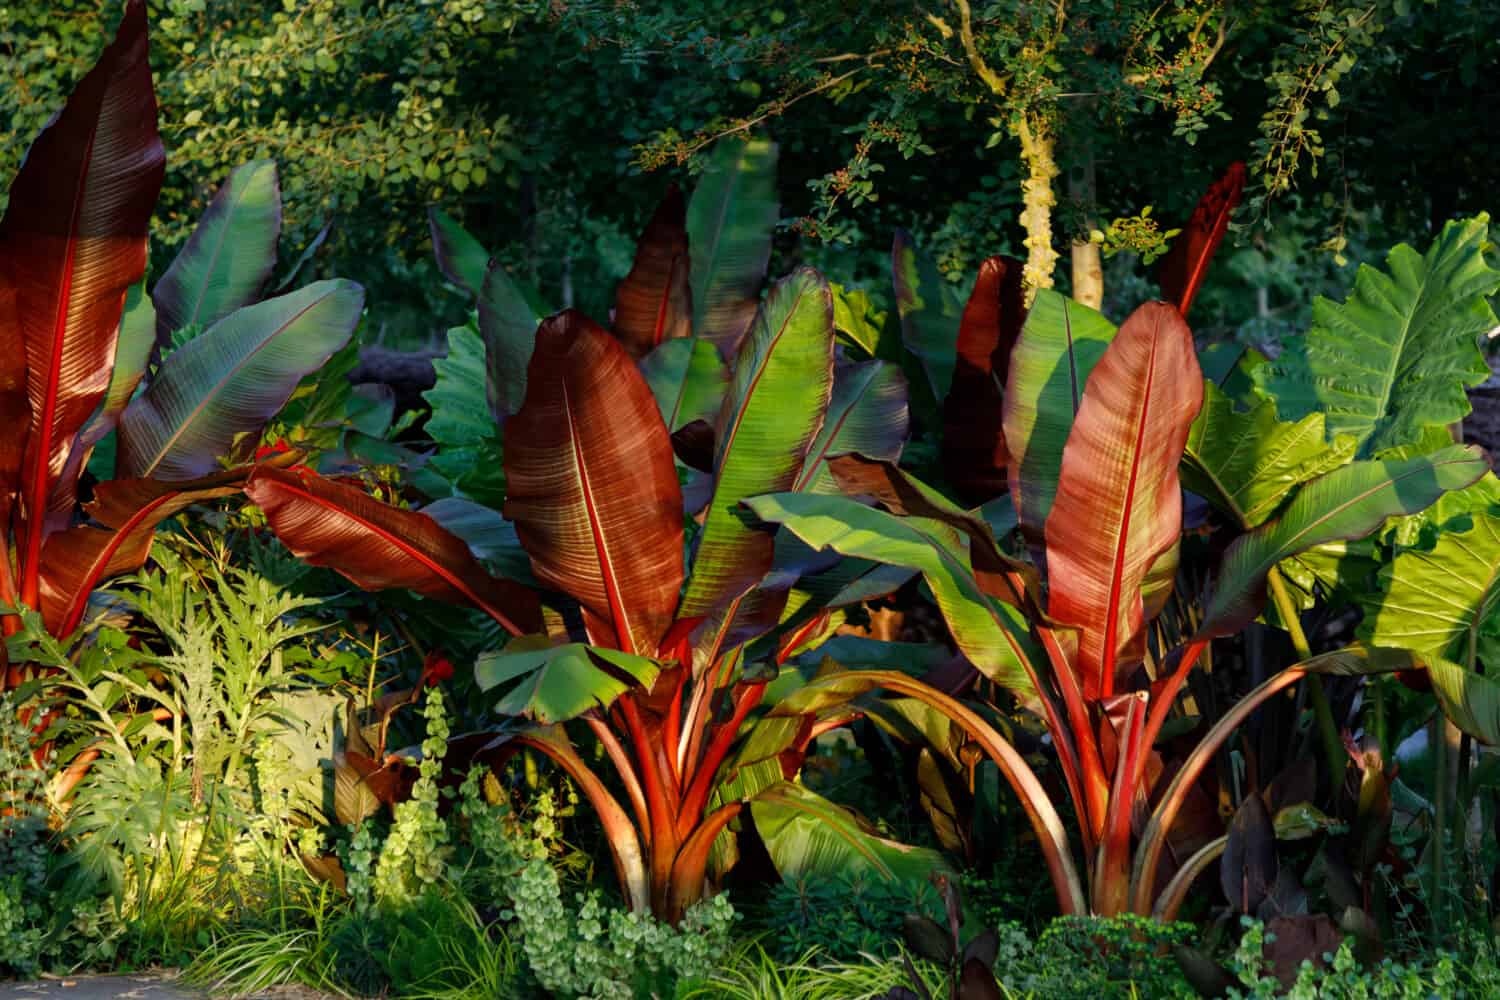 Red Abyssinian Banana Ensete Ventricosum Maurelii Planted in Public Park. Leaves of a tropical plant in the rays of the setting sun